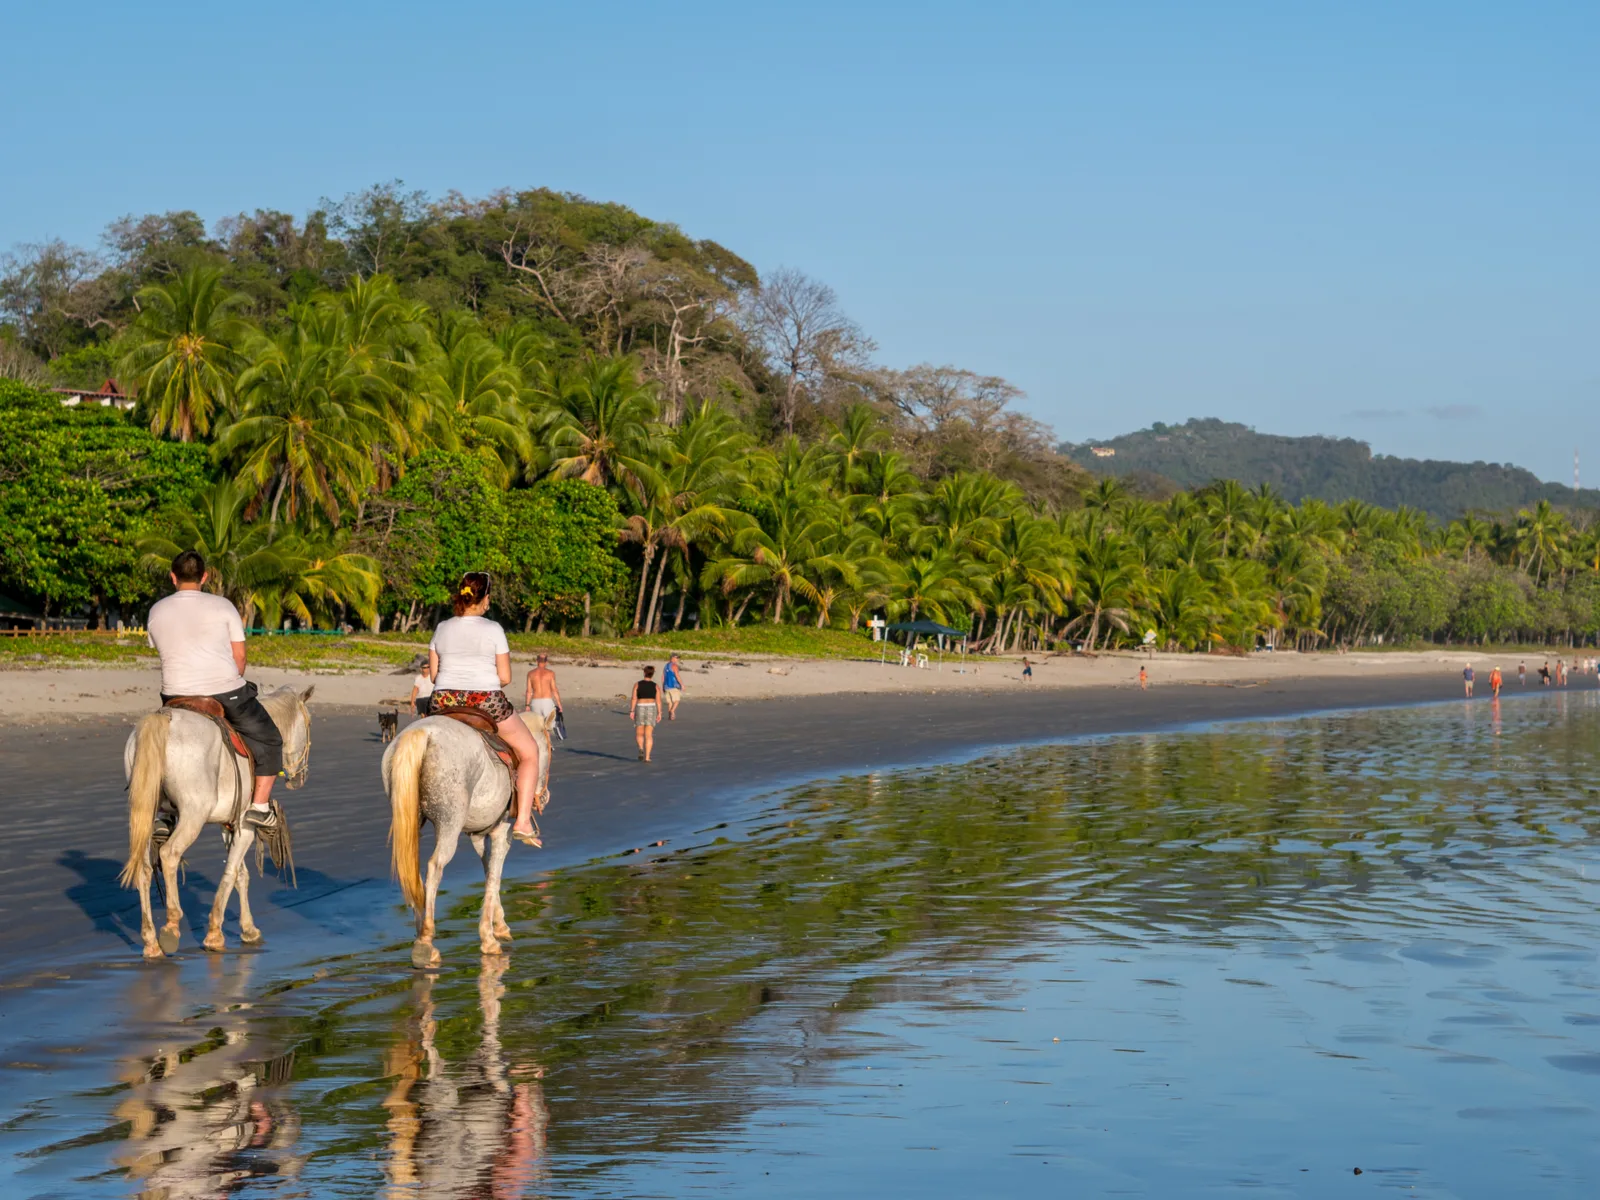 Tourists horseback riding on Samara beach, one of the best beaches in Costa Rica that also has black sand